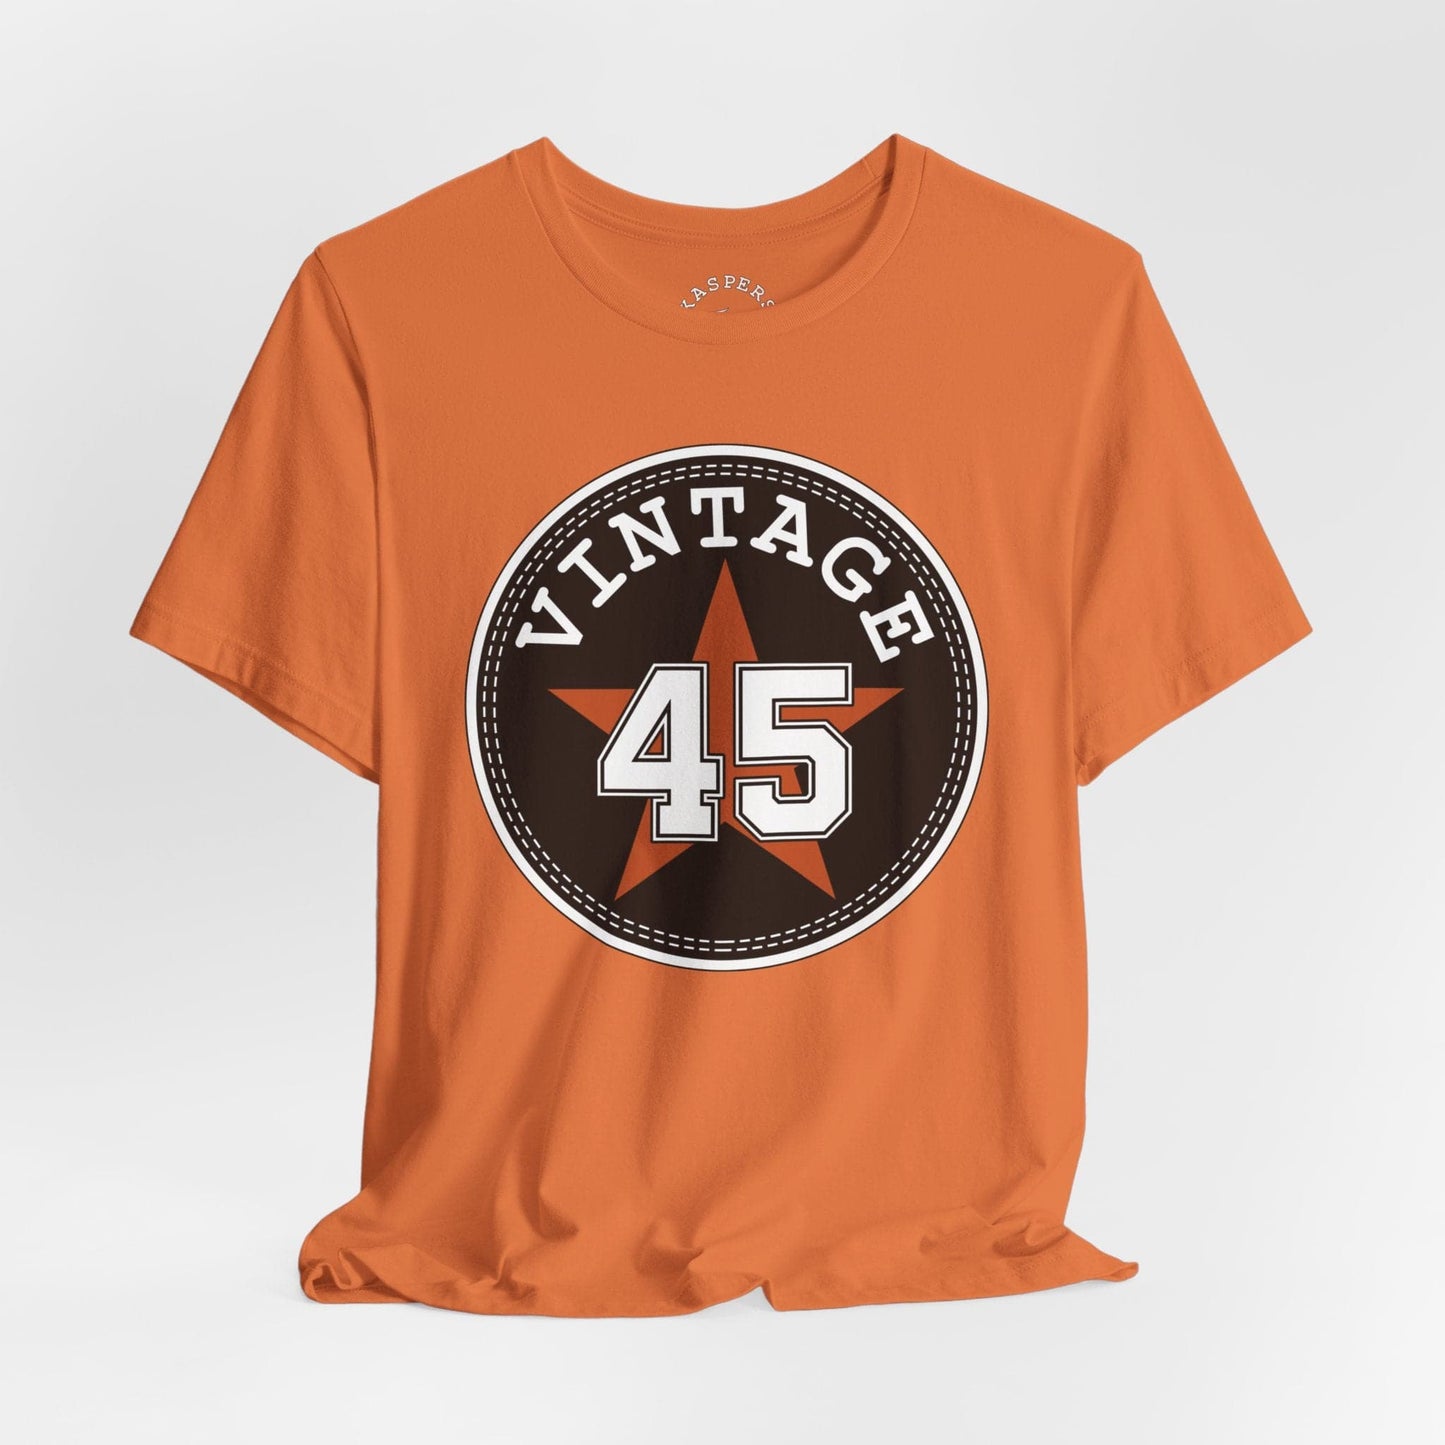 Vintage 45 "Limited Edition" T-Shirt